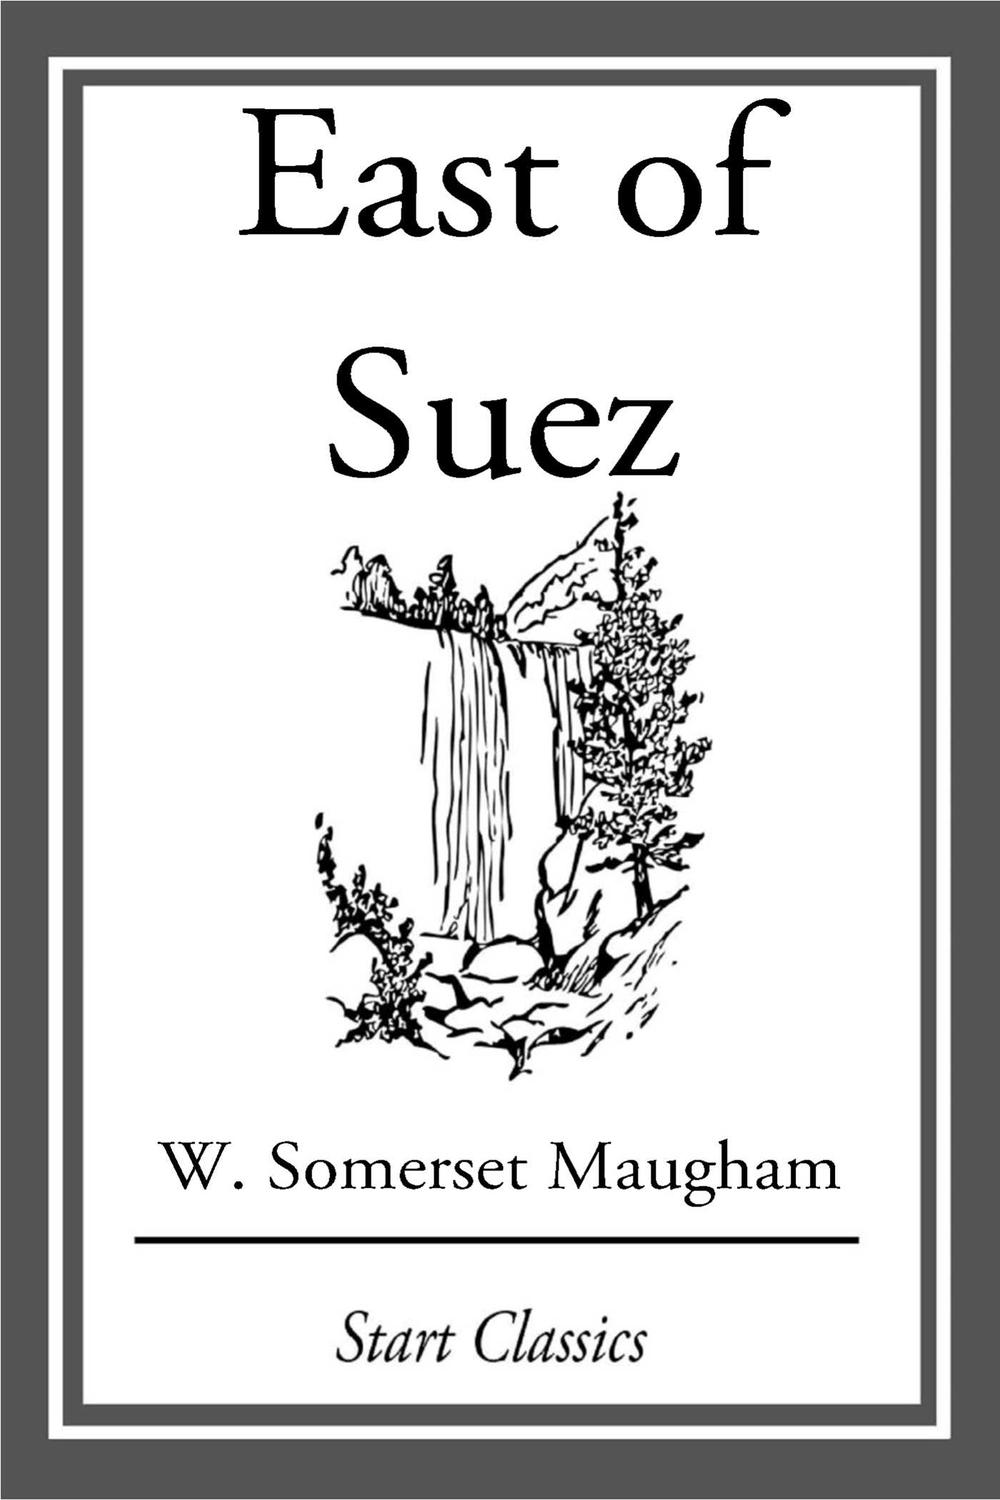 East of Suez - W. Somerset Maugham